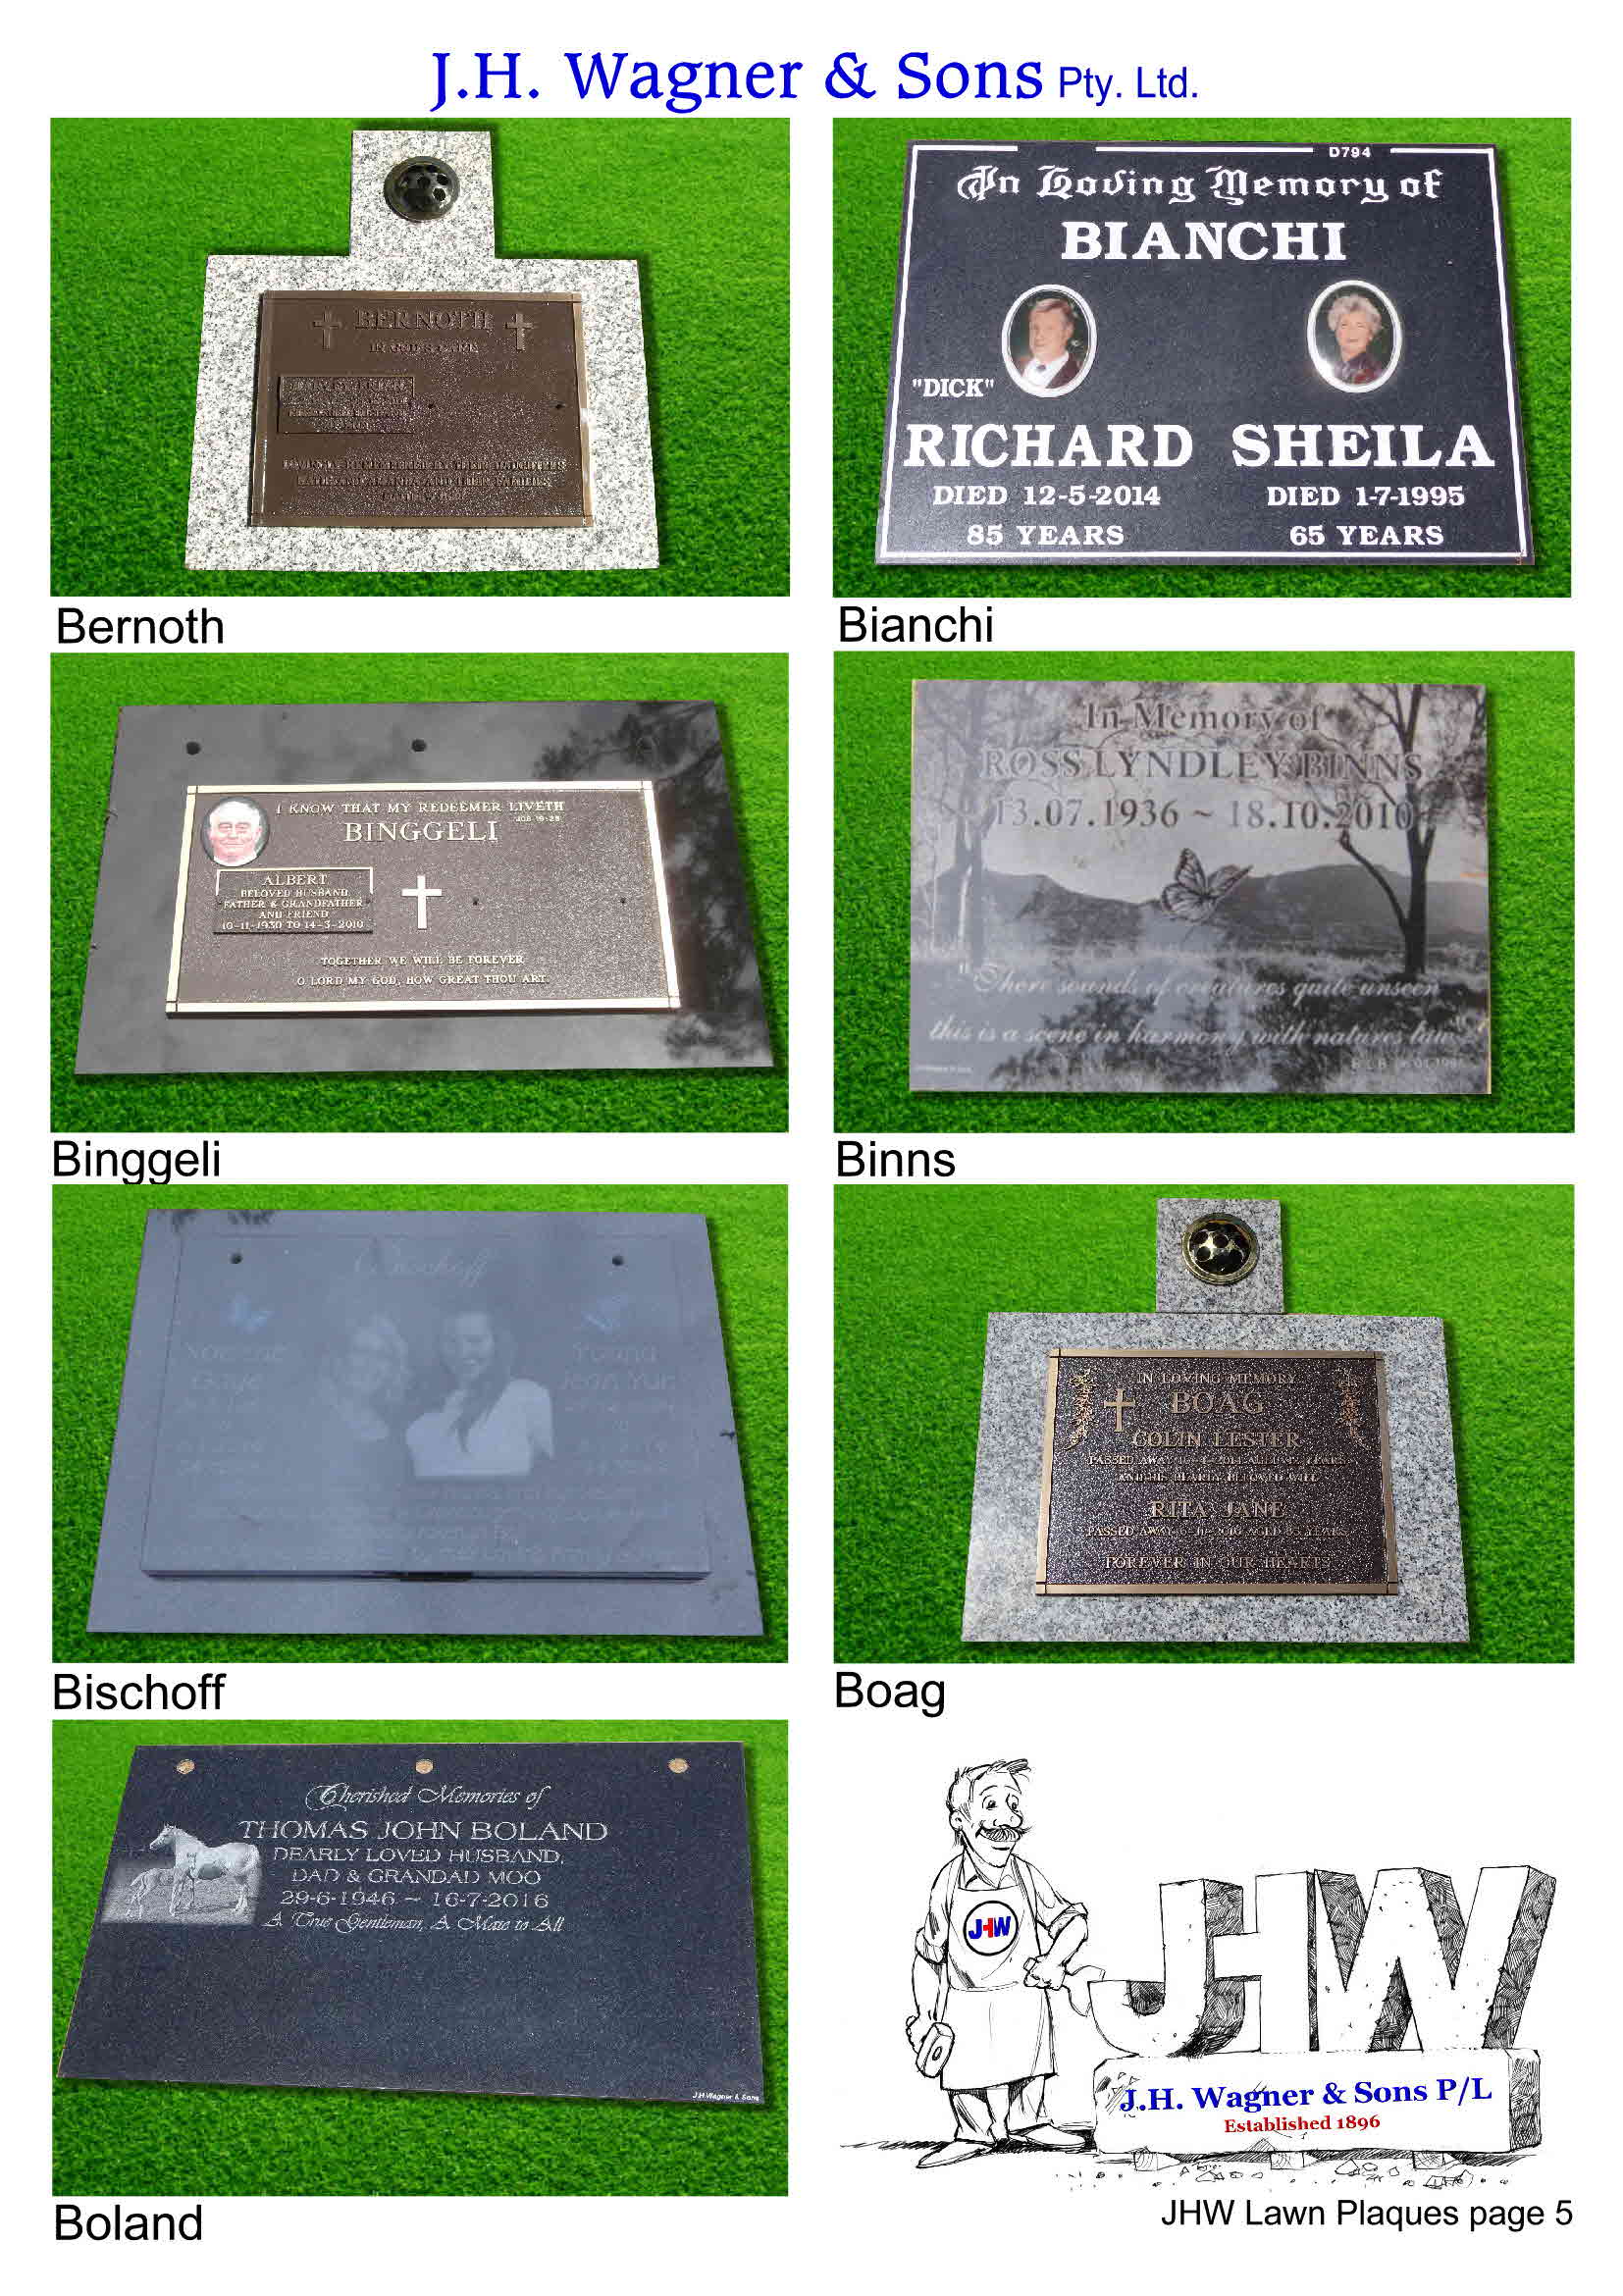 Cemetery Lawn plaques by J.H. Wagner & Sons page 5